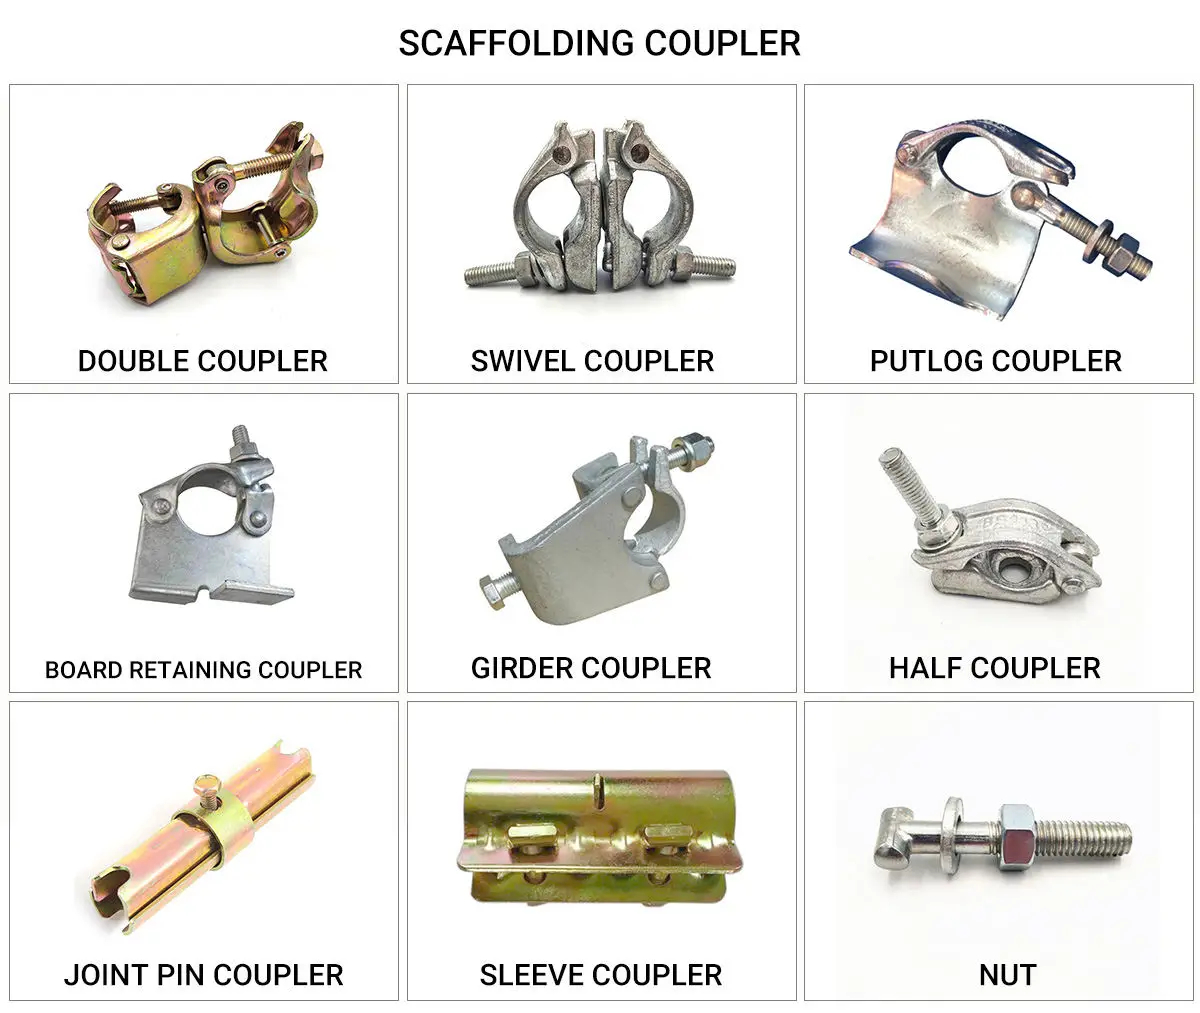 scaffold couplers